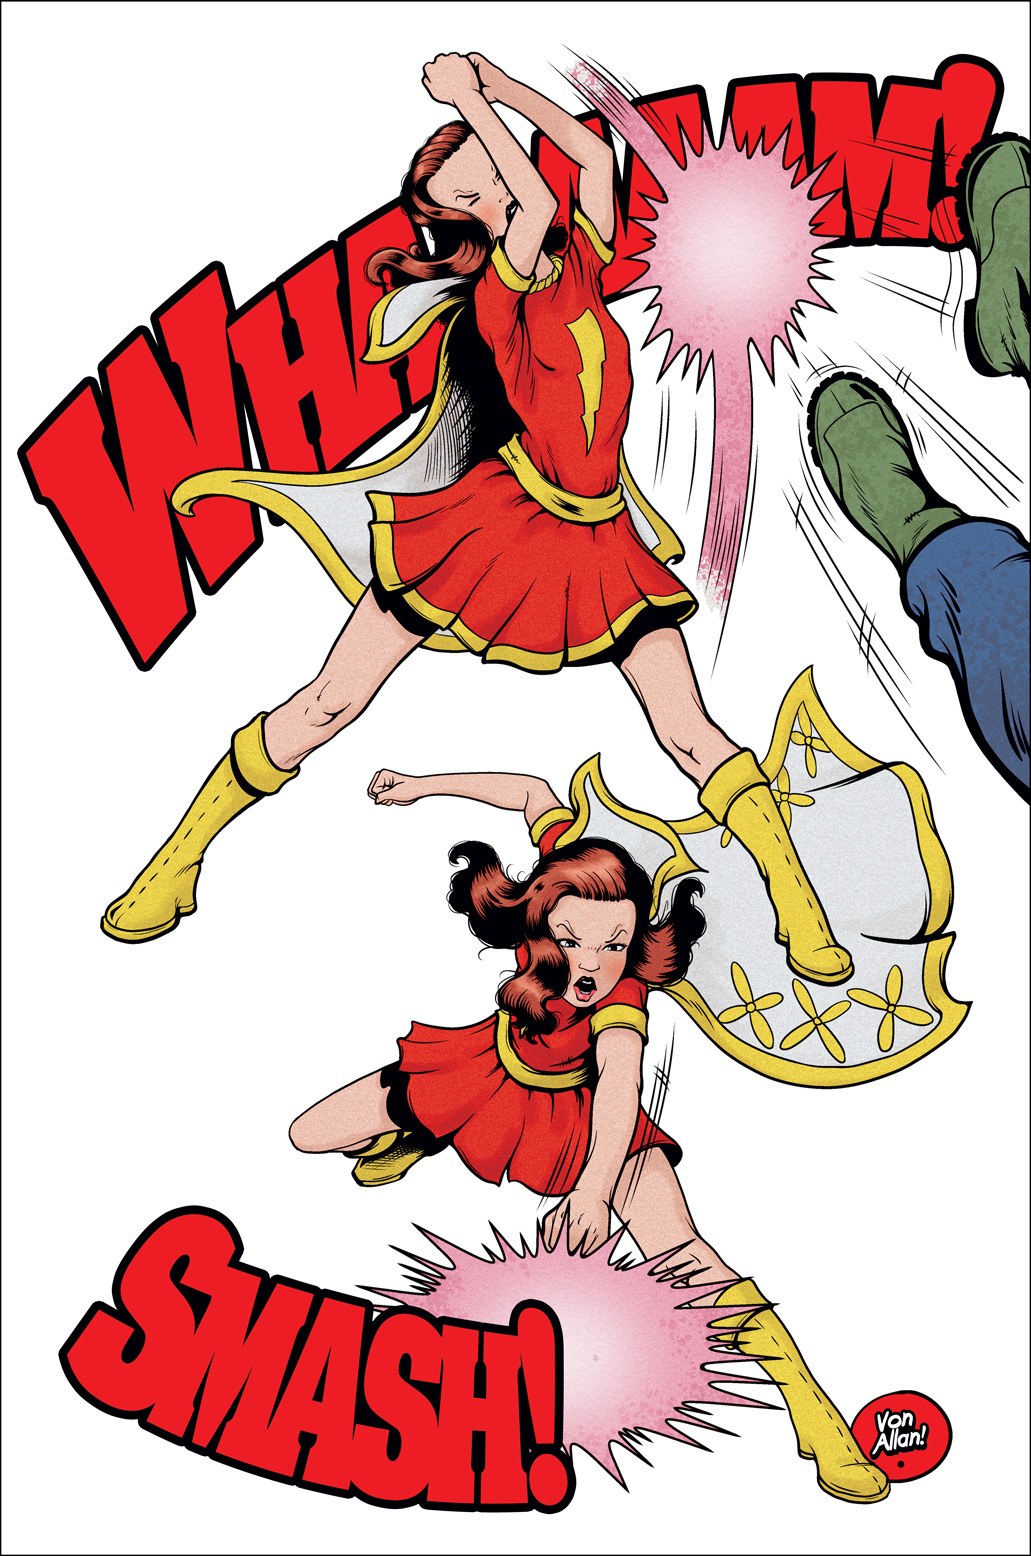 Mary Marvel in two different action shots by illustrator Von Allan